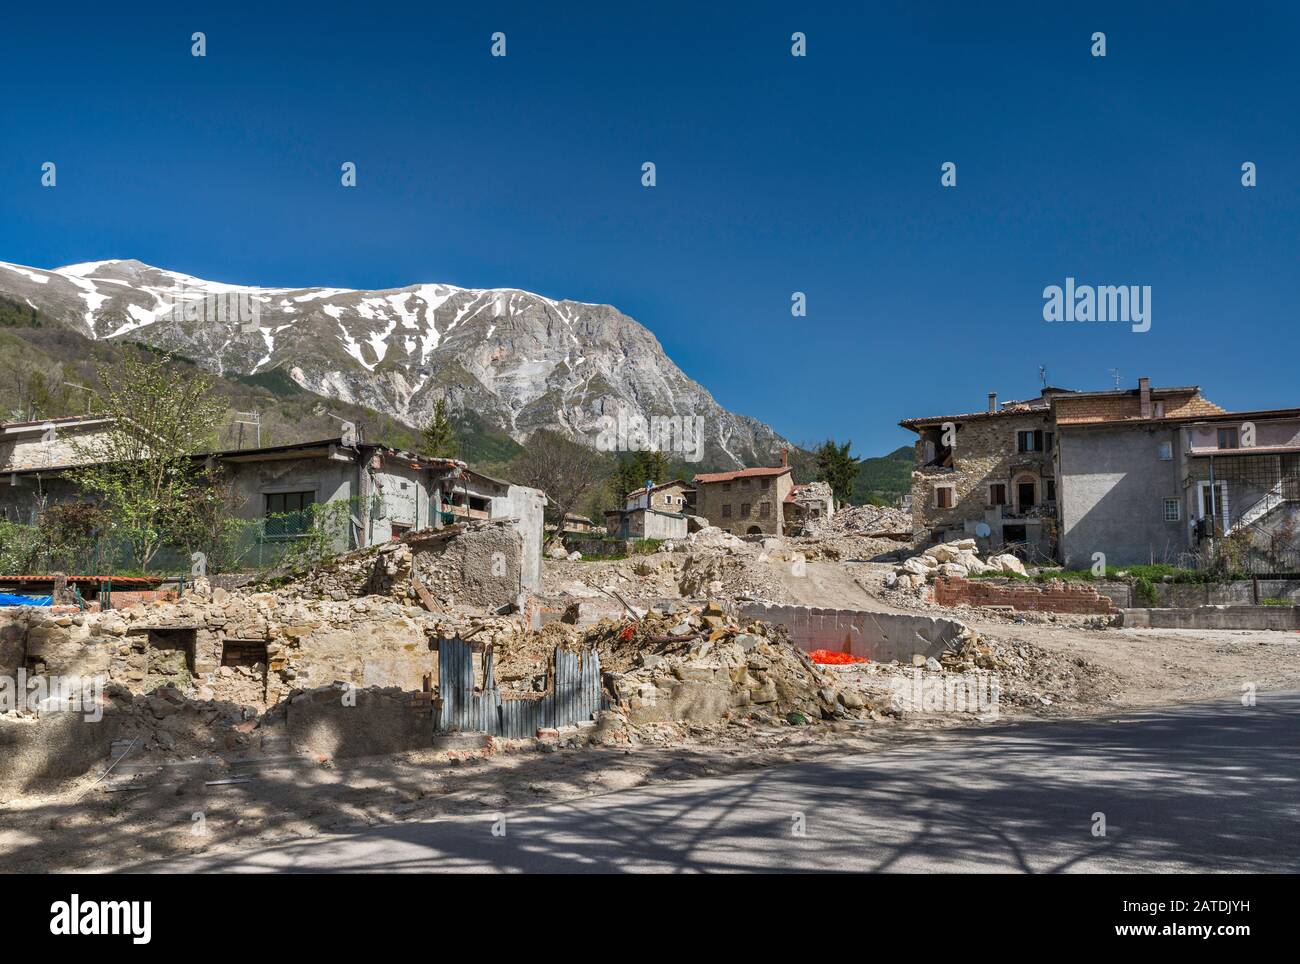 Ruined houses in village of Piedilama, destroyed by earthquakes in October 2016, Monti Sibillini National Park, Central Apennines, Marche, Italy Stock Photo